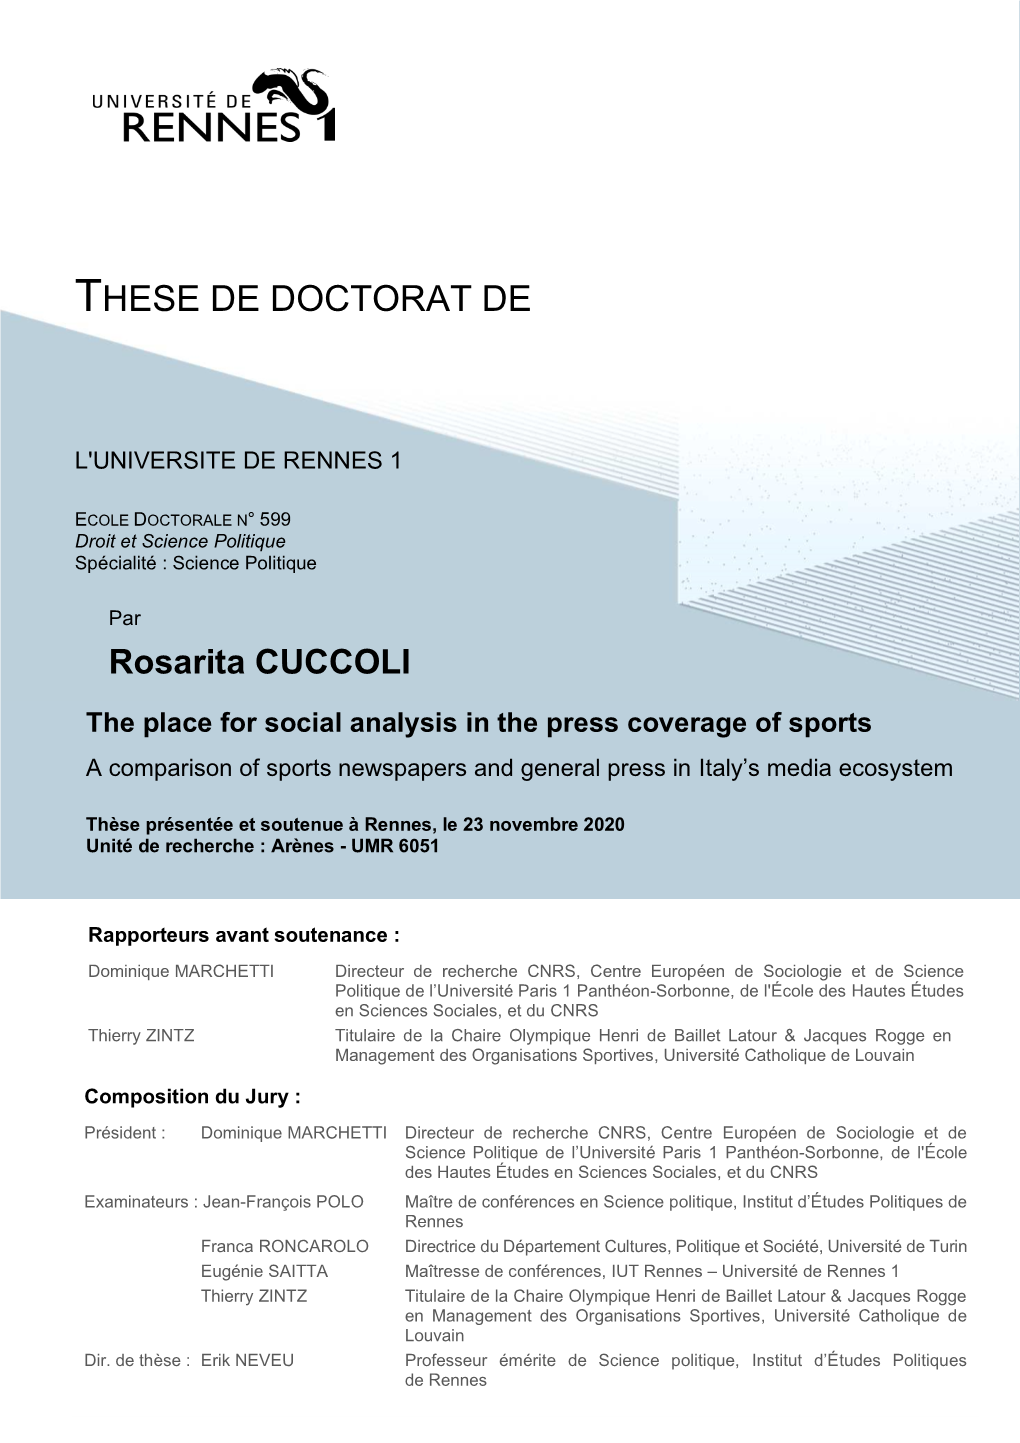 The Place for Social Analysis in the Press Coverage of Sports: A